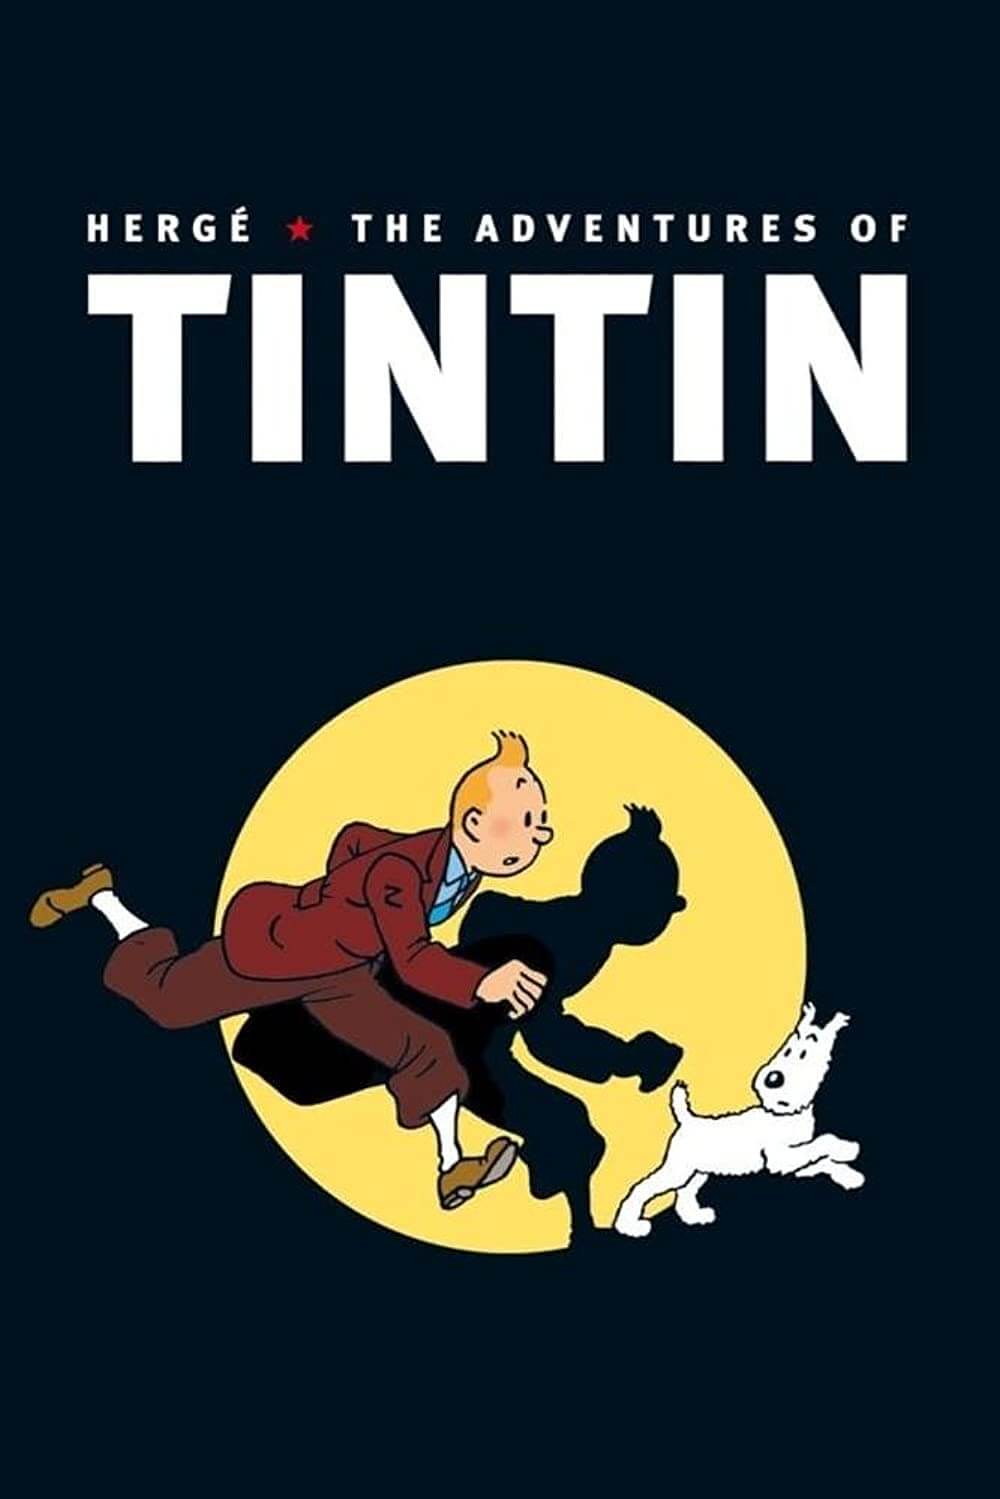 The-Adventures-of-Tintin-1991-1992-crave-tv-best-shows